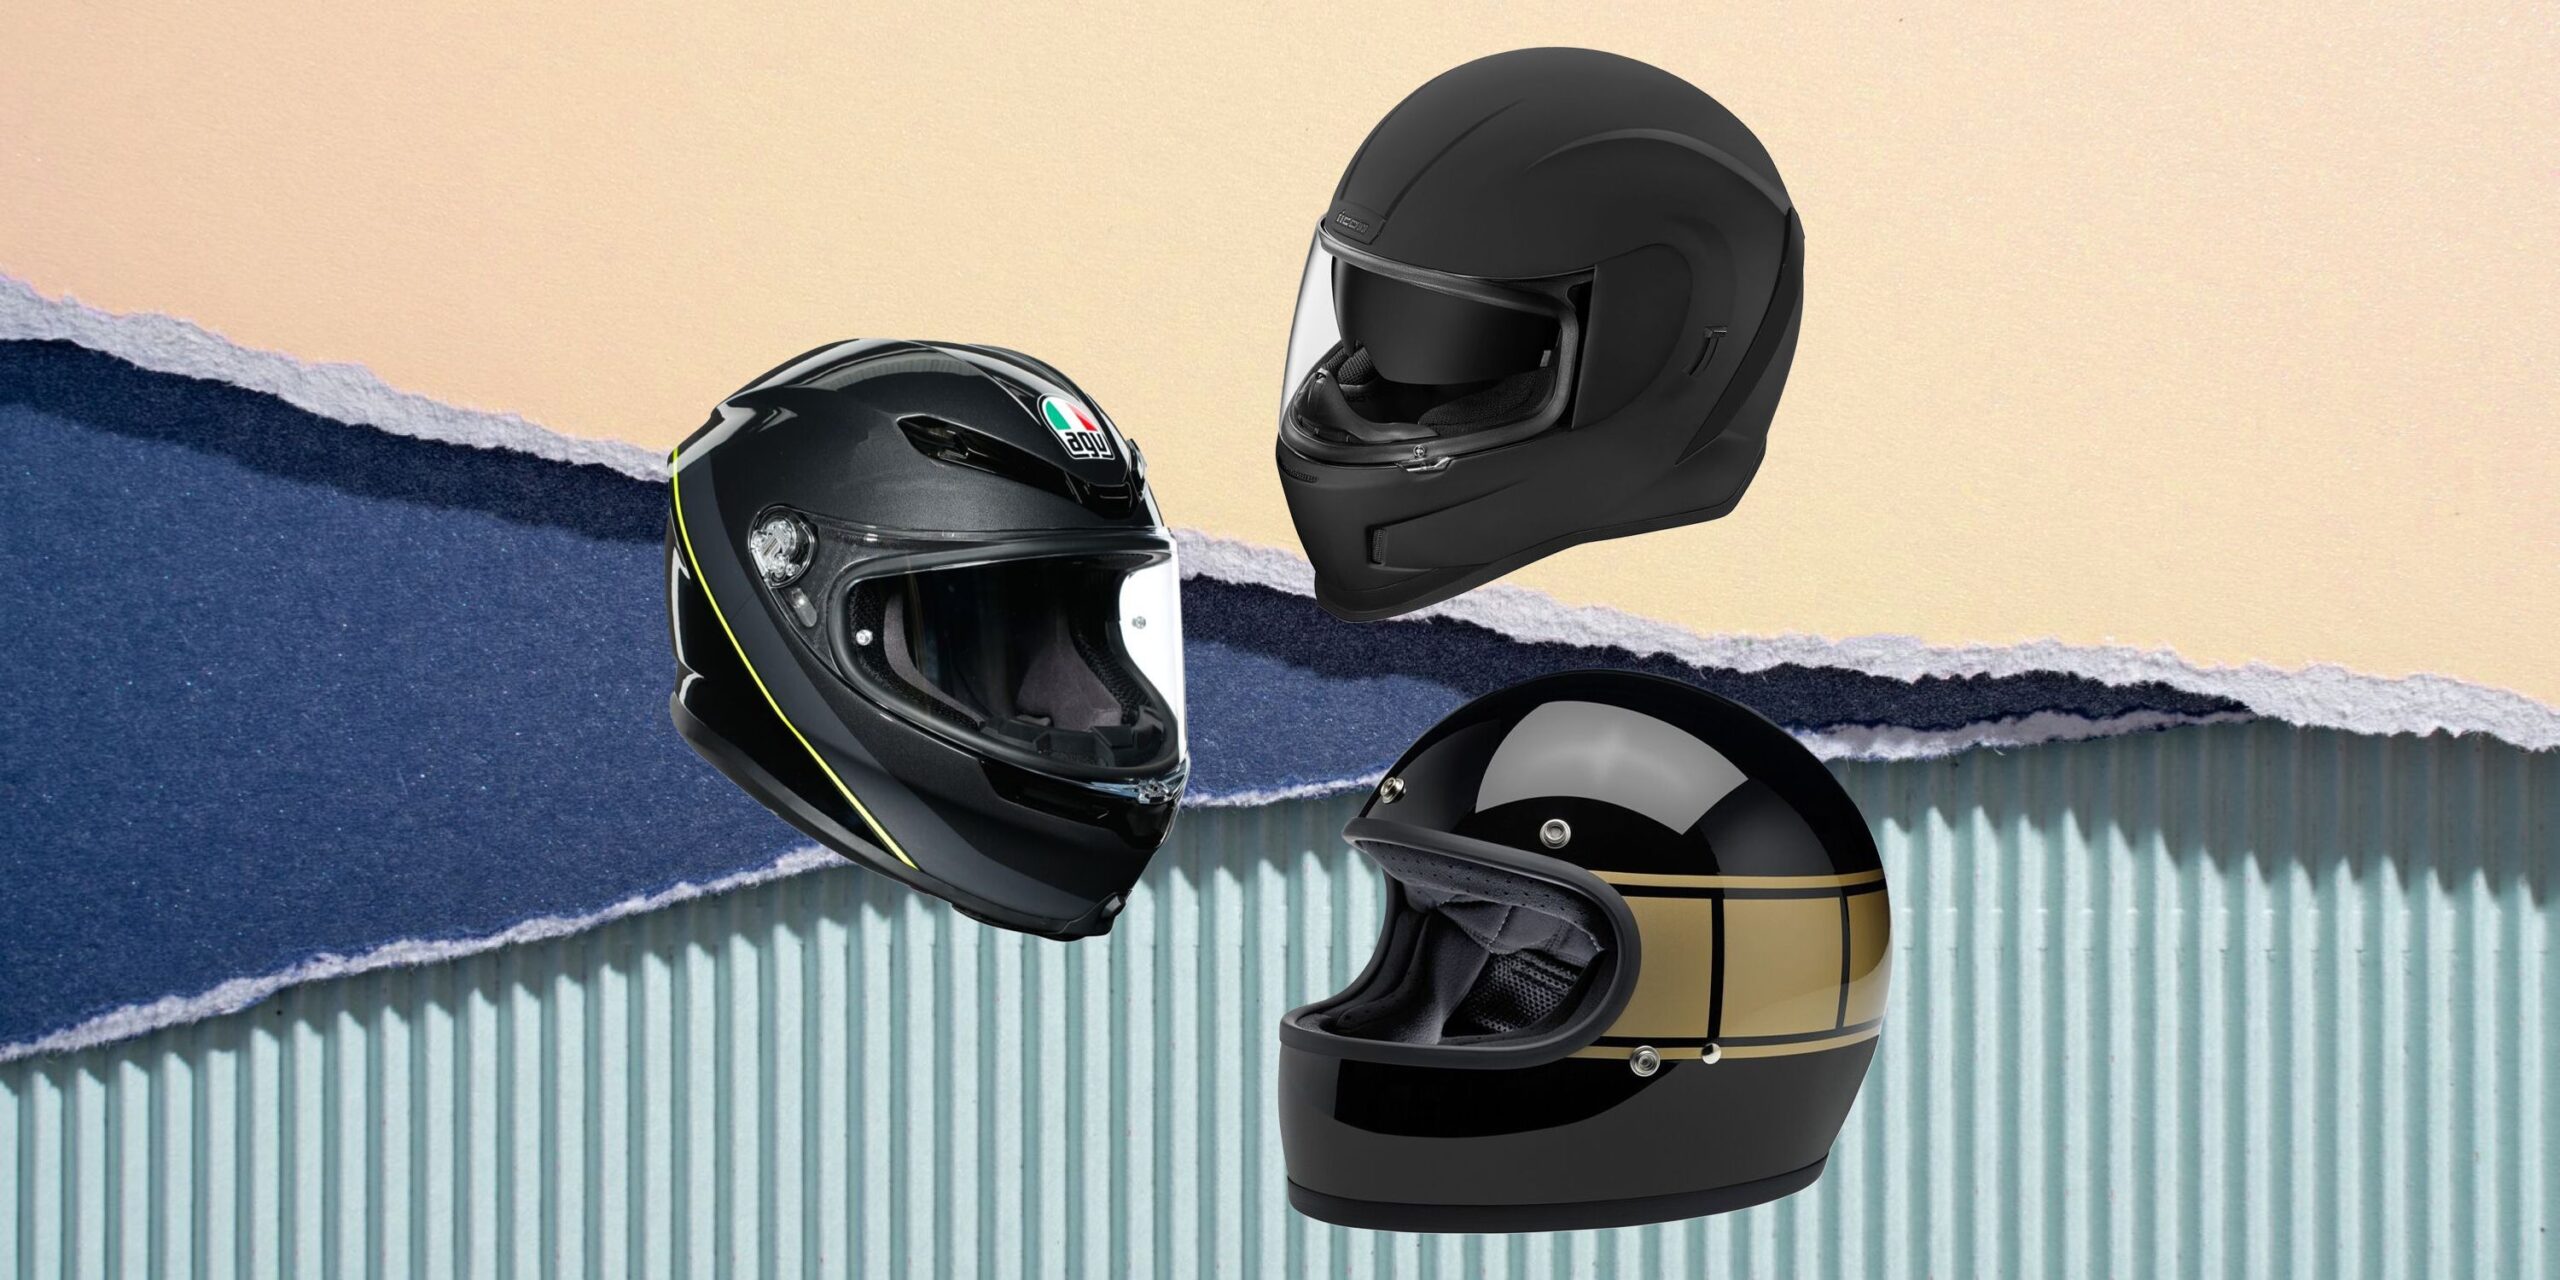 Airpods Motorcycle Helmet: Are They a Good Fit? - Motorcycle World